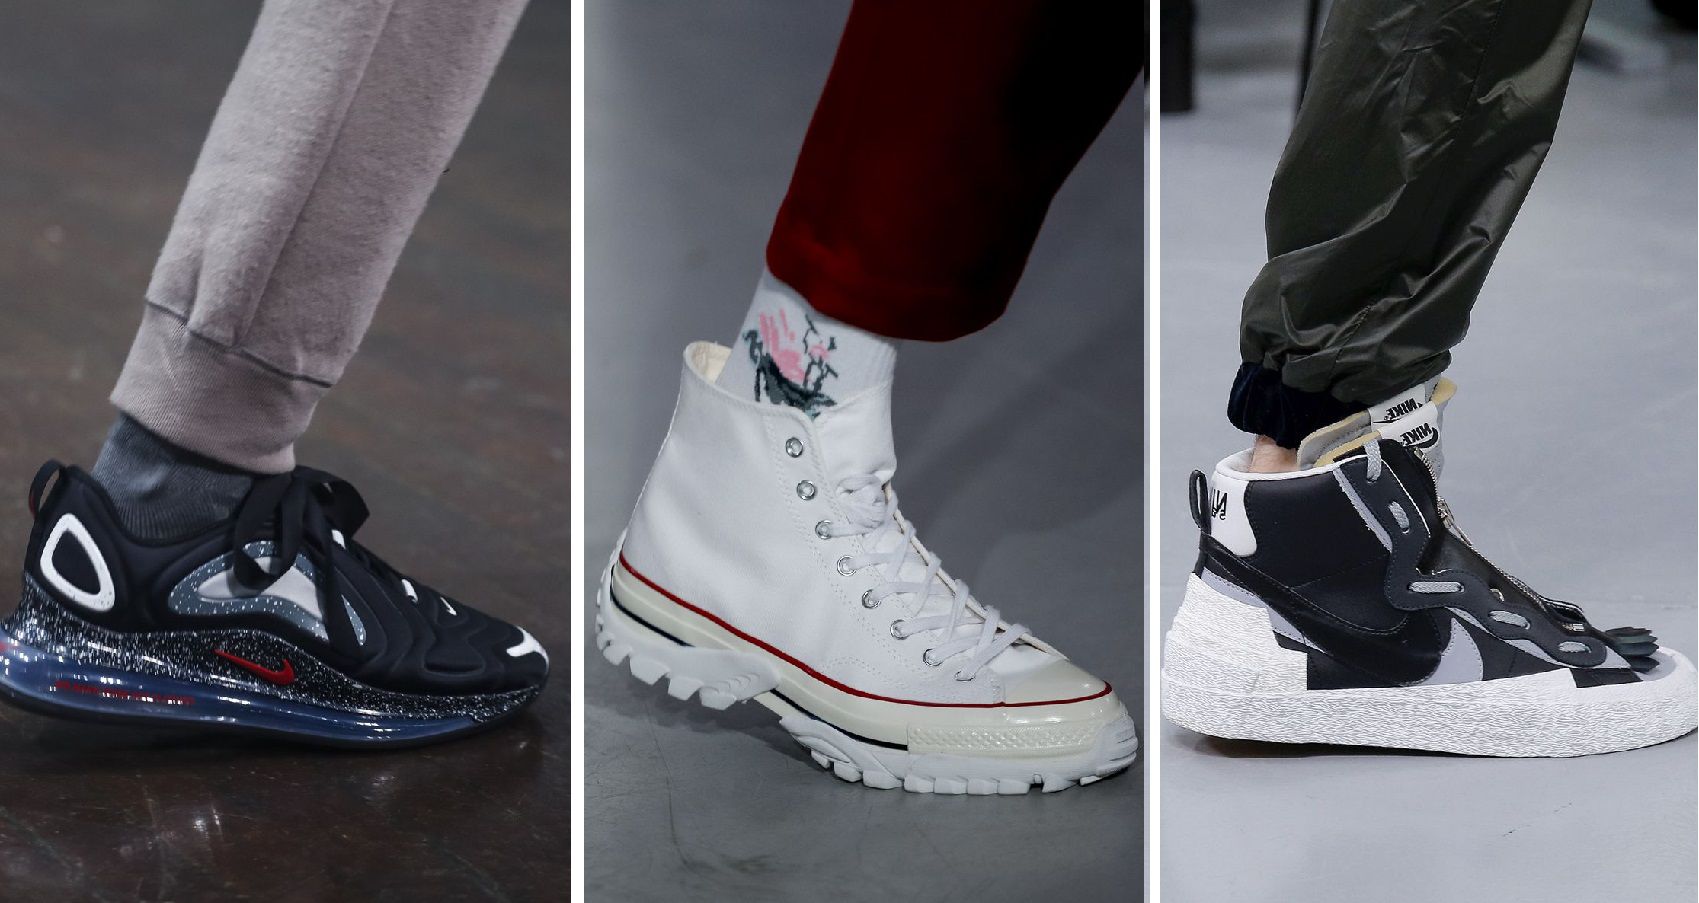 Sneaker Boots Hybrid Is Dominating The Runway Of Louis Vuitton Resort 2019